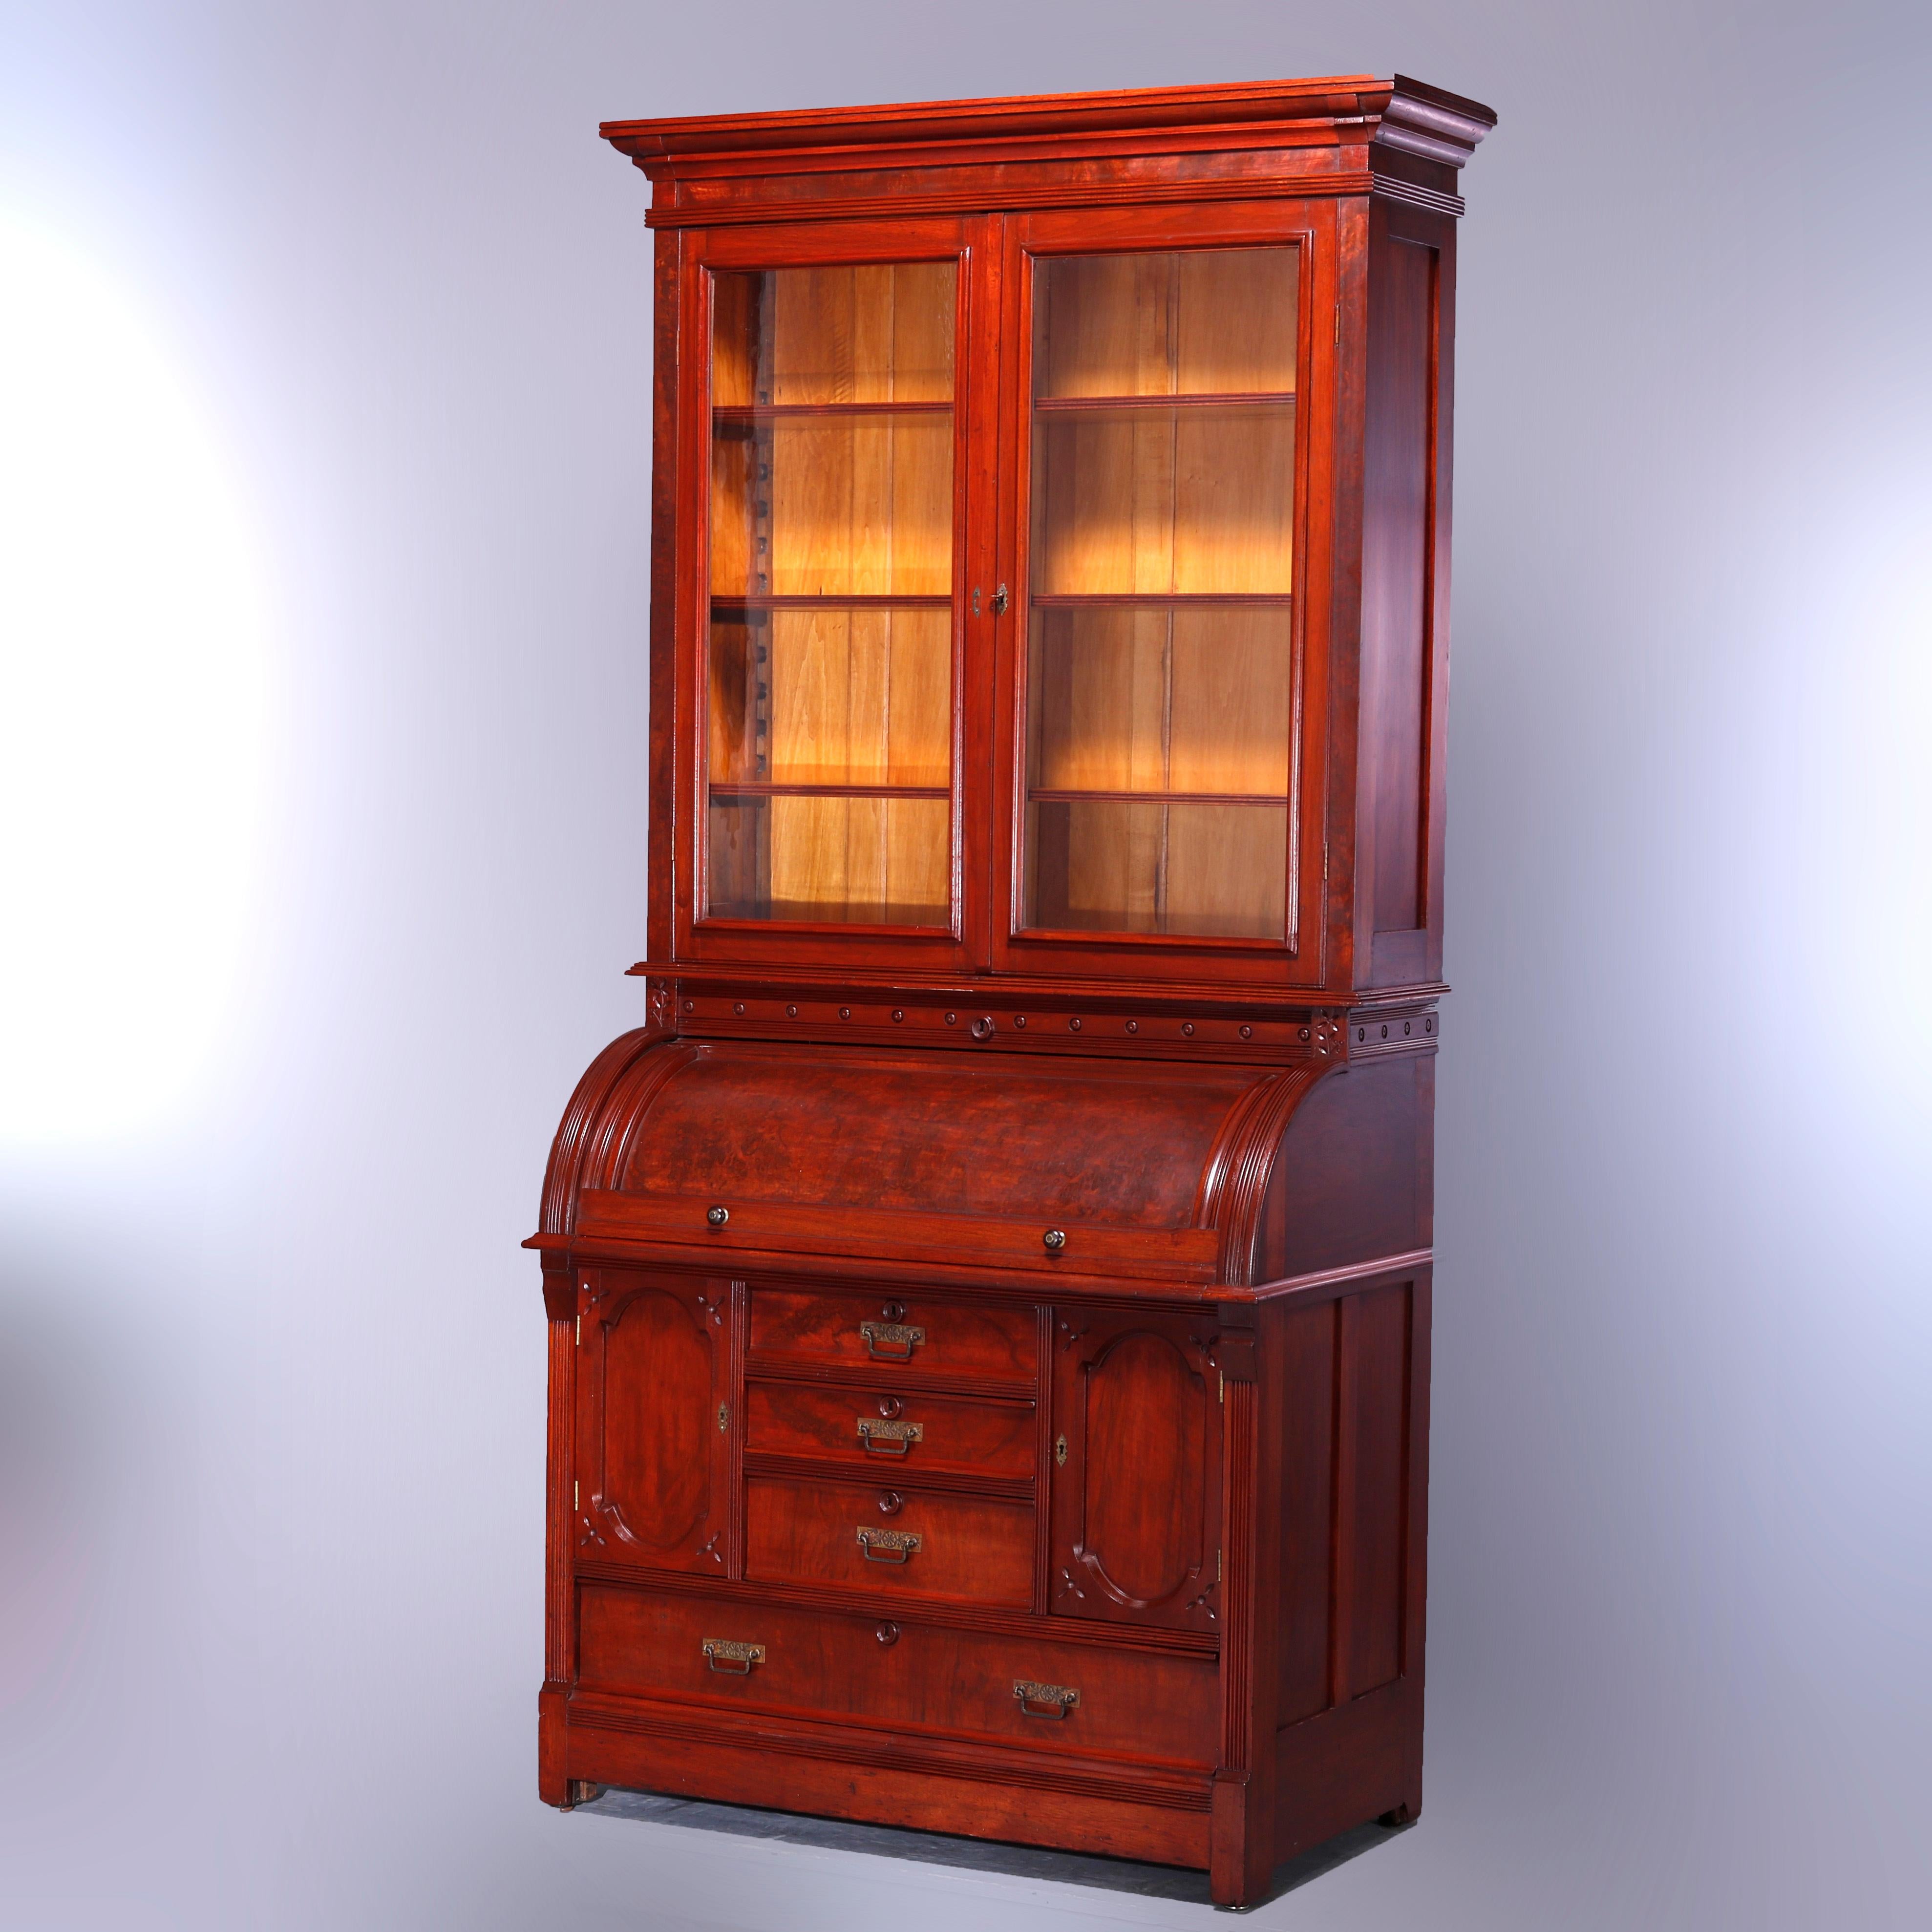 Antique roll top secretary offers walnut and burl paneled construction with upper bookcase with double glass doors opening to shelved interior and surmounting cylinder desk having central drawer tower with flanking cabinets and lower long drawer,